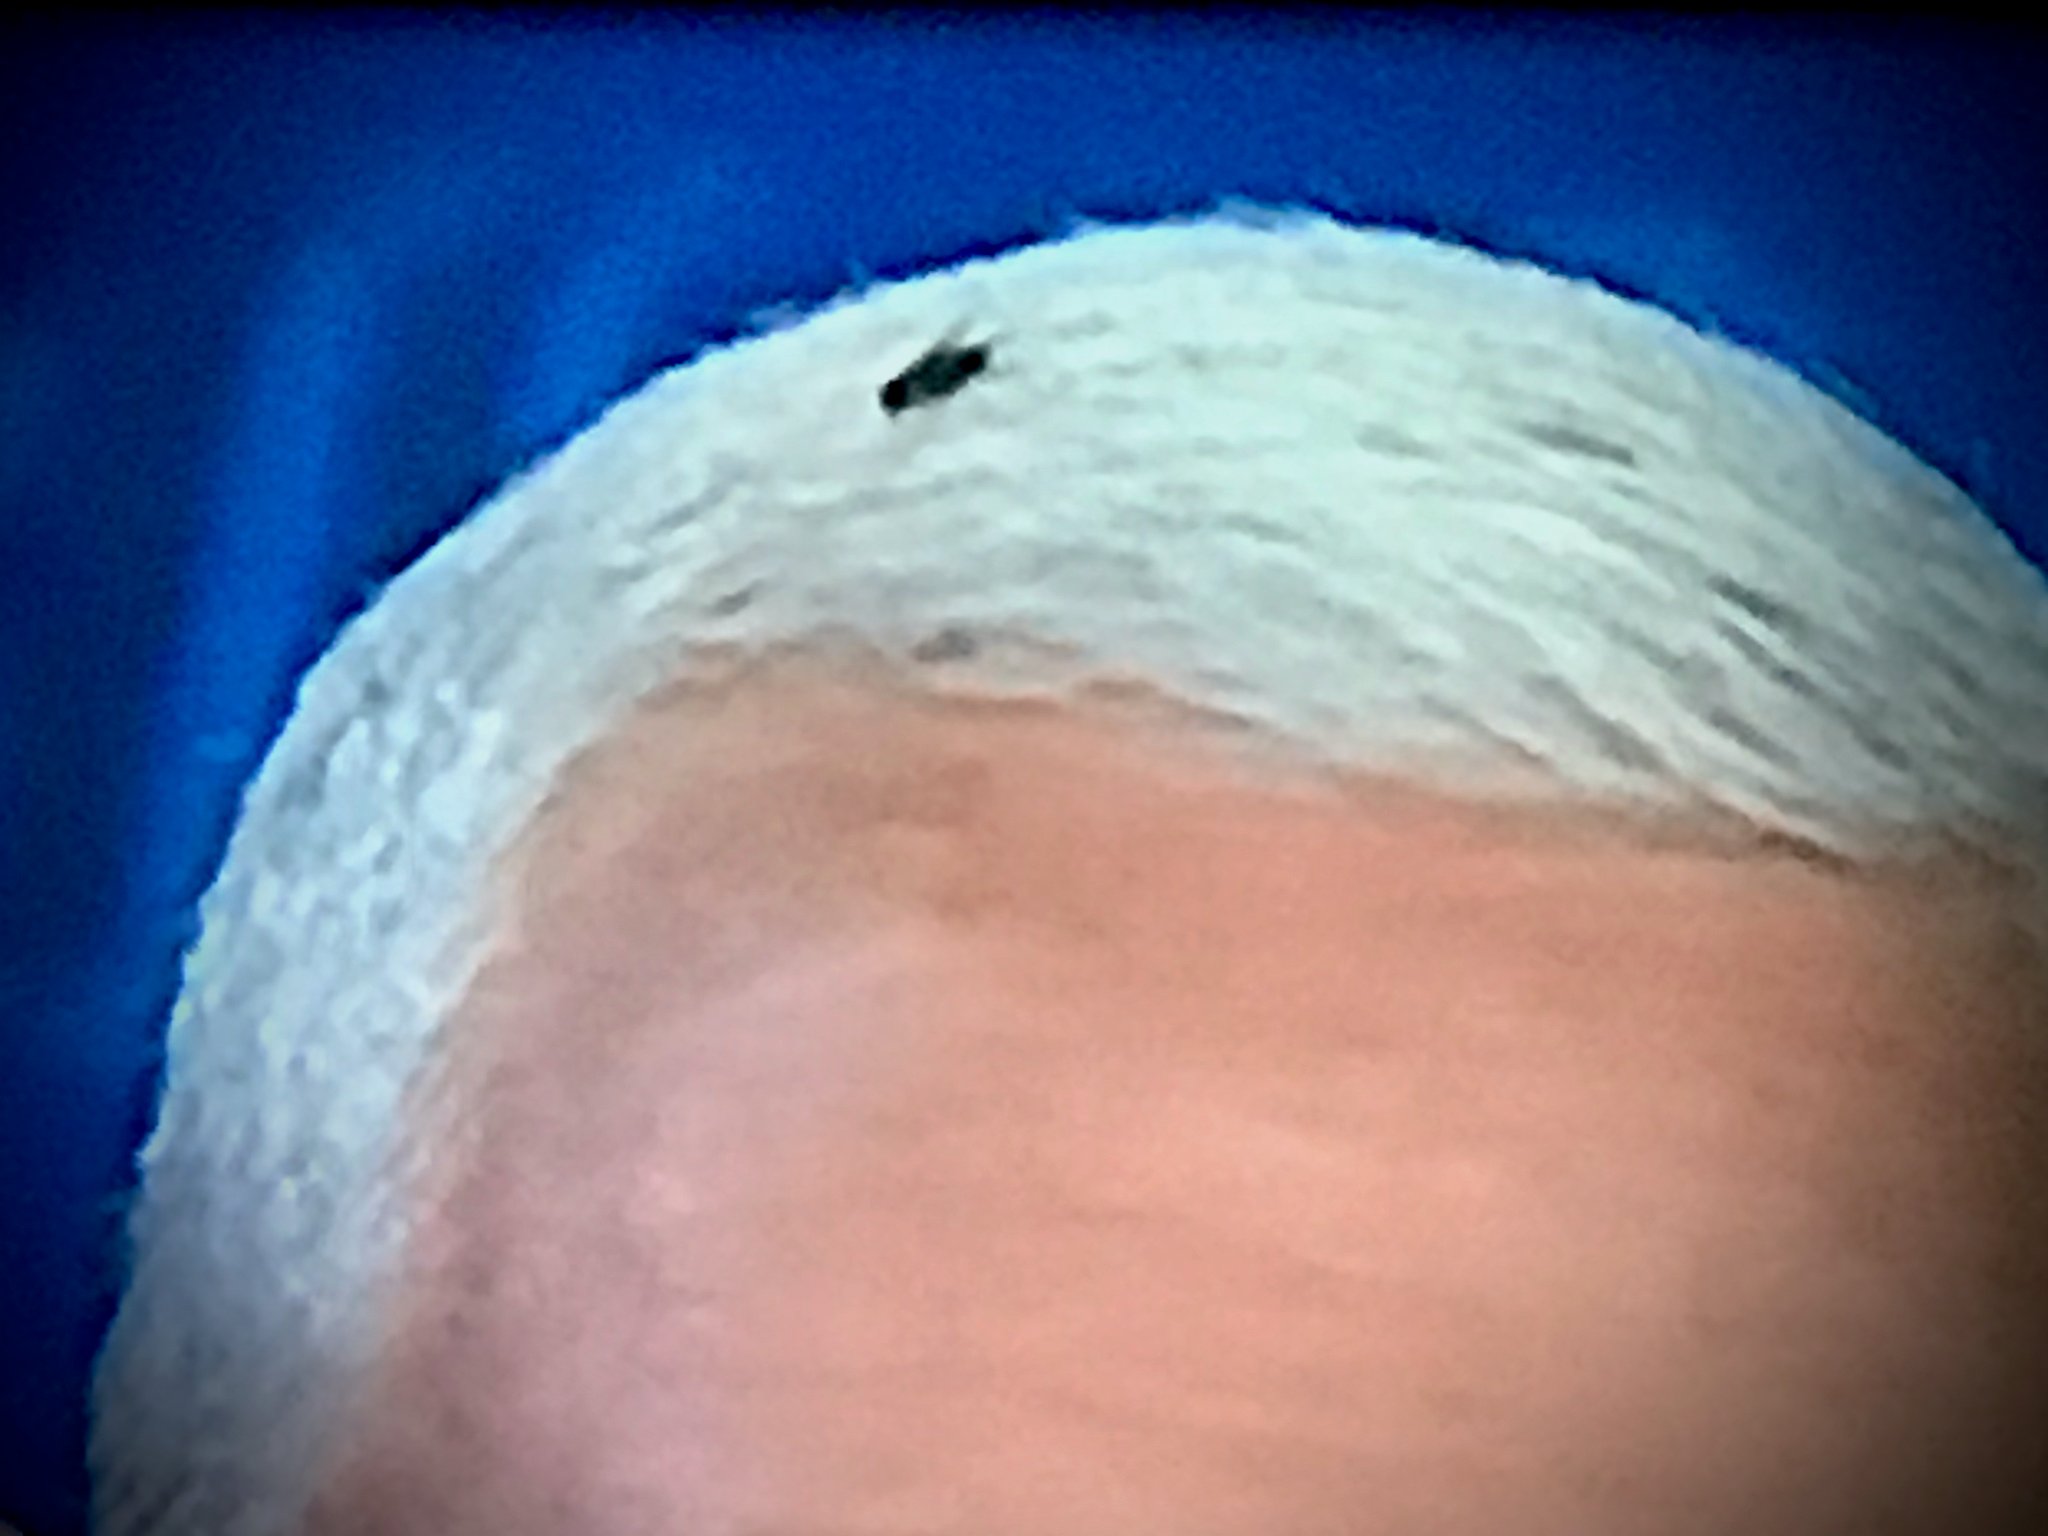 We Need To Talk About the Fly on Mike Pence's Head